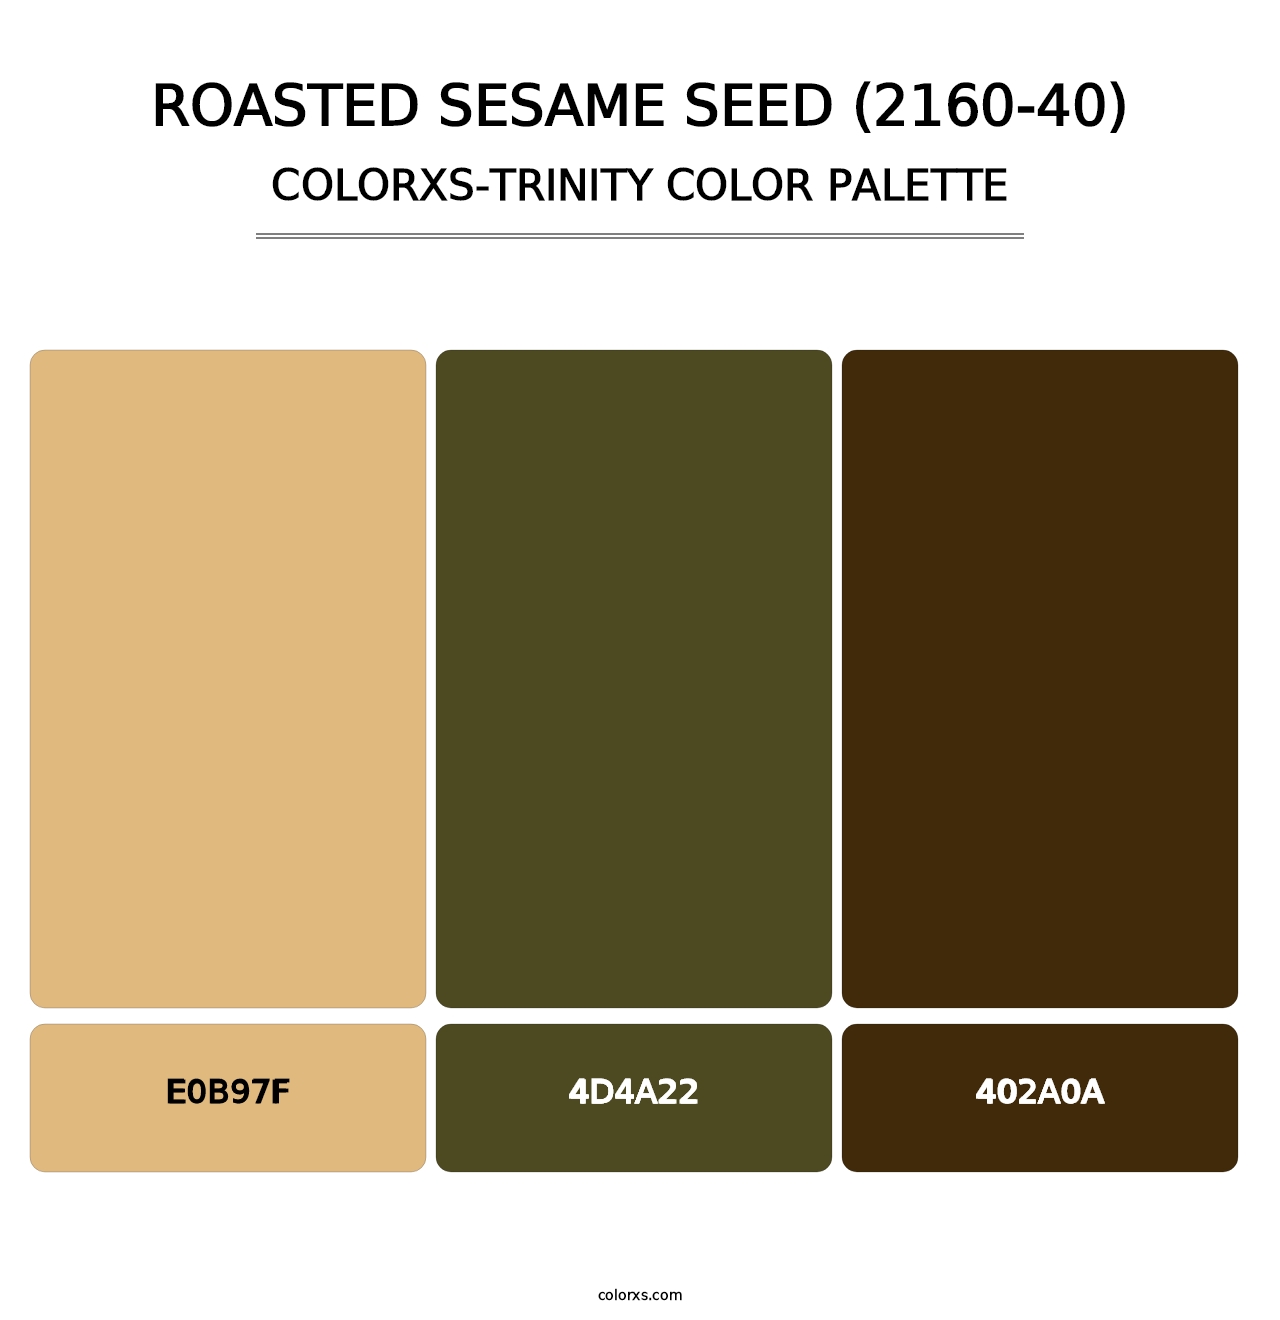 Roasted Sesame Seed (2160-40) - Colorxs Trinity Palette